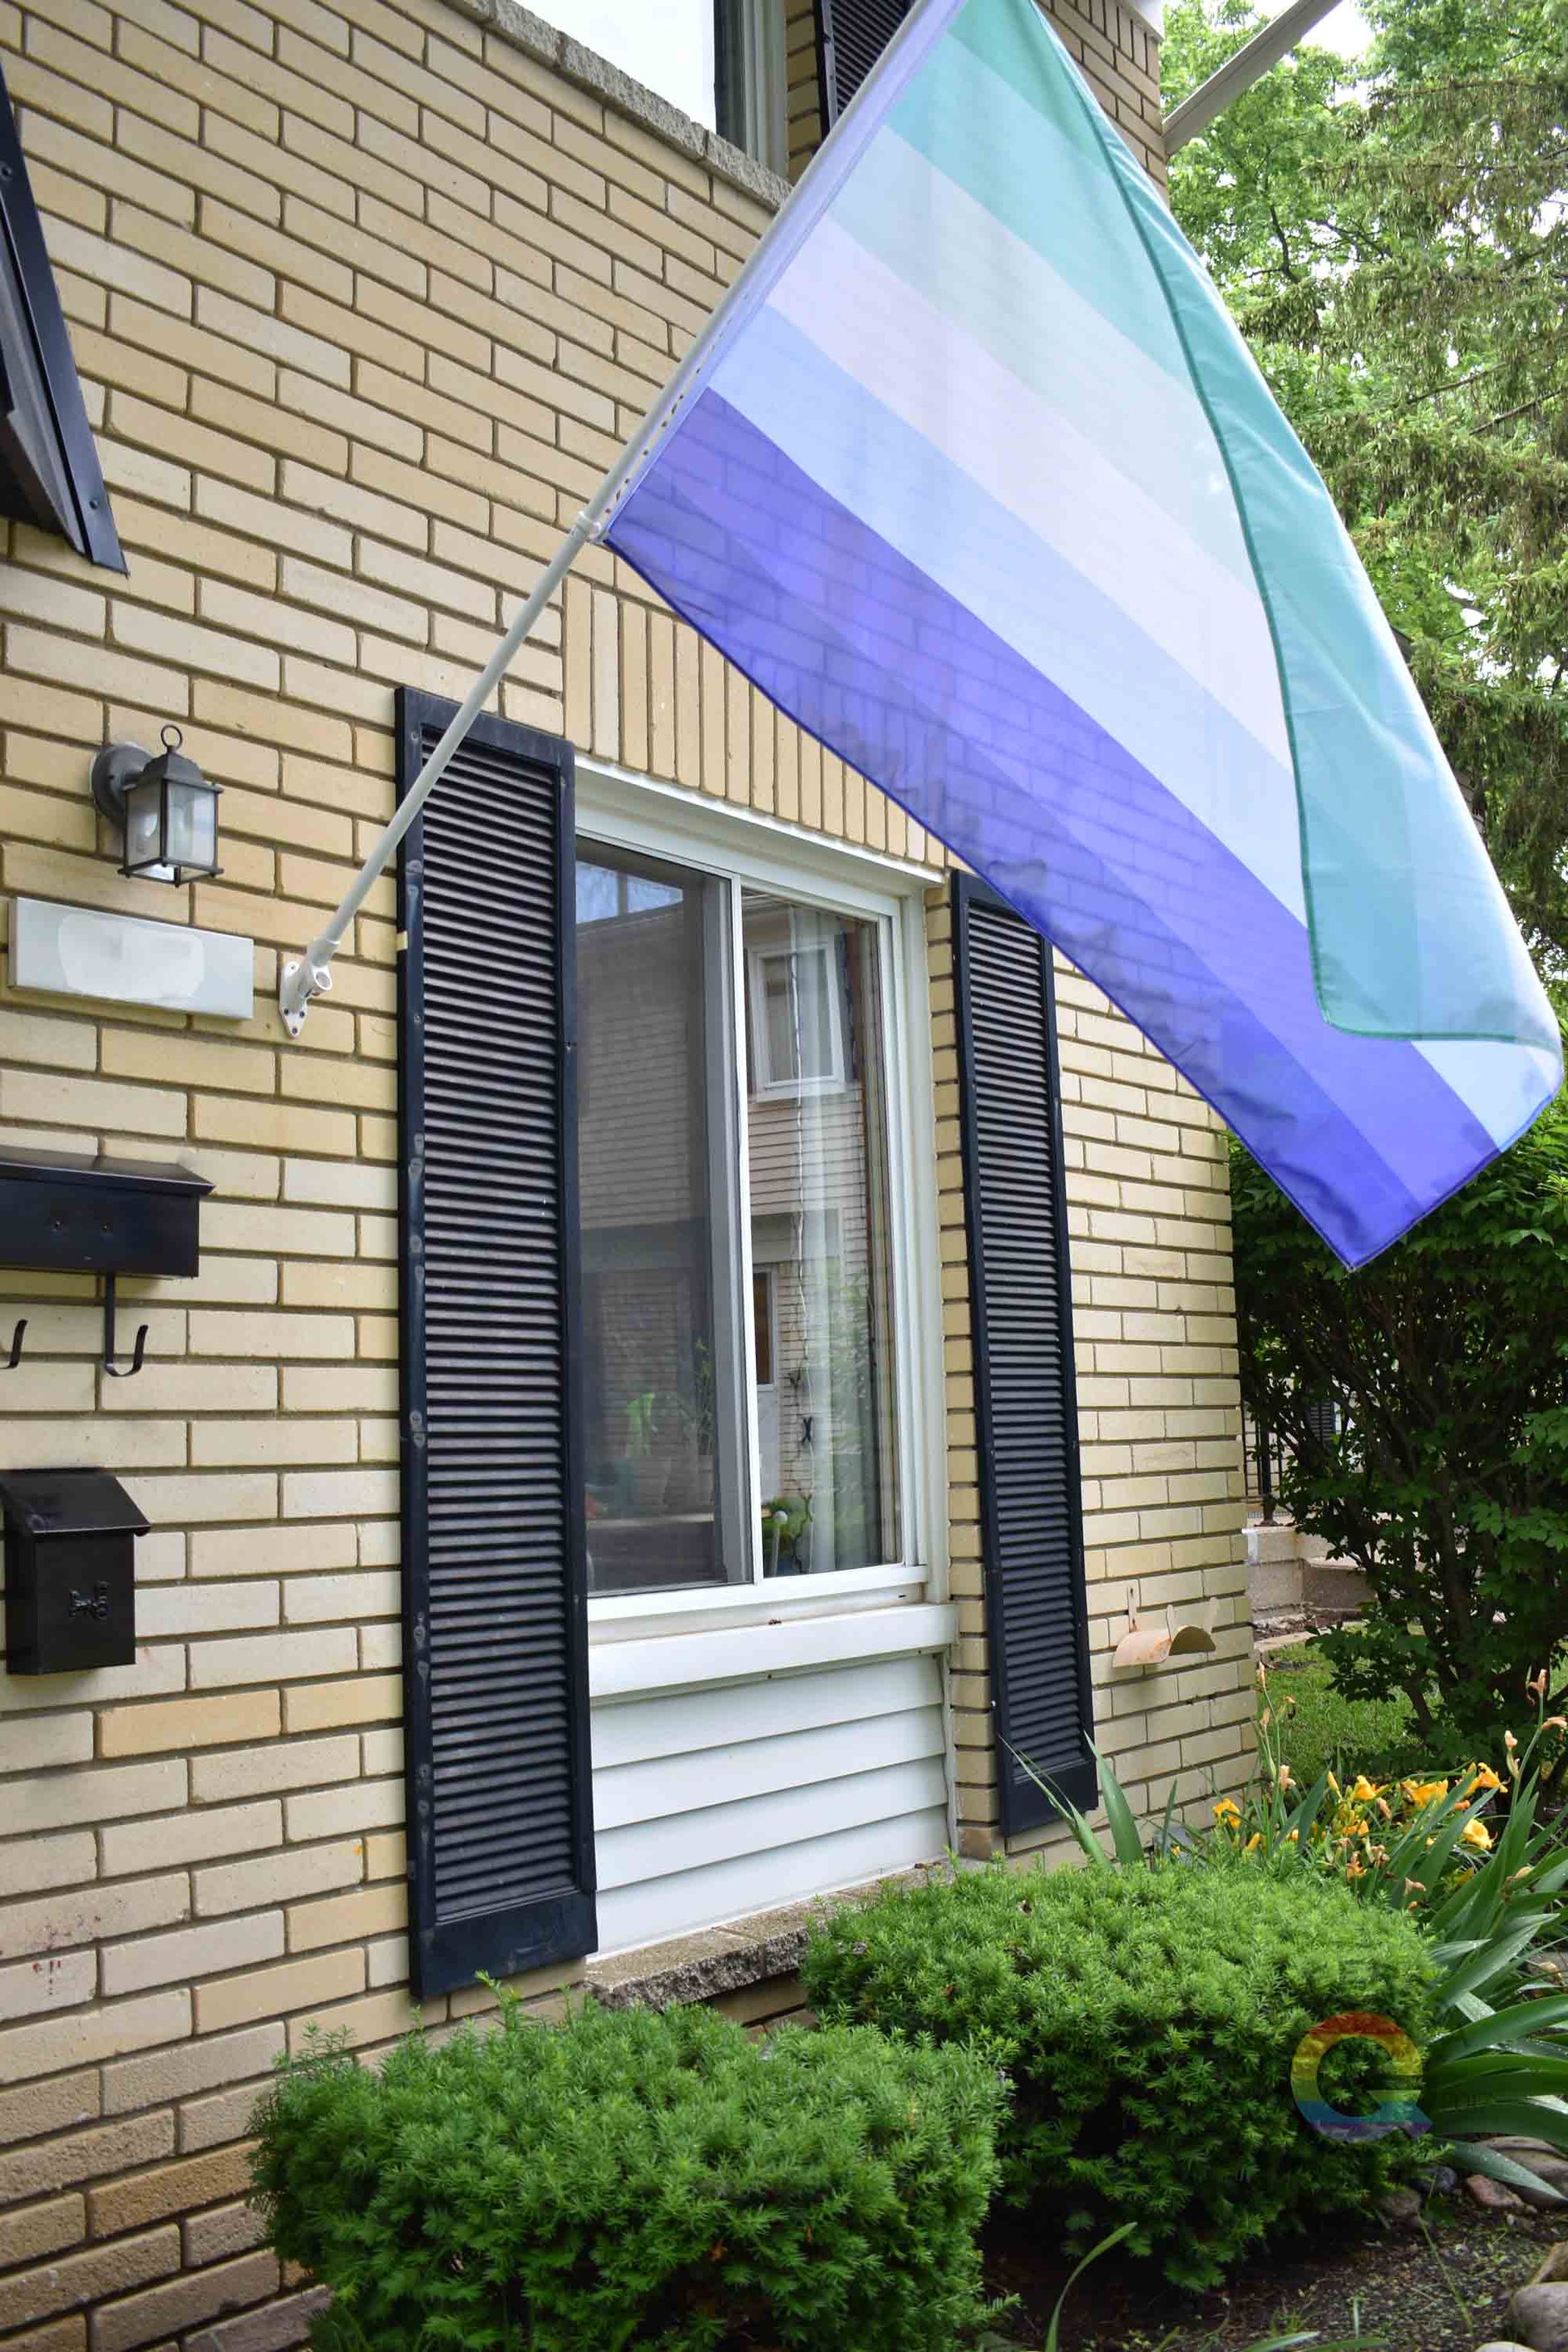 3’x5’ gay pride flag hanging from a flagpole on the outside of a light brick house with dark shutters